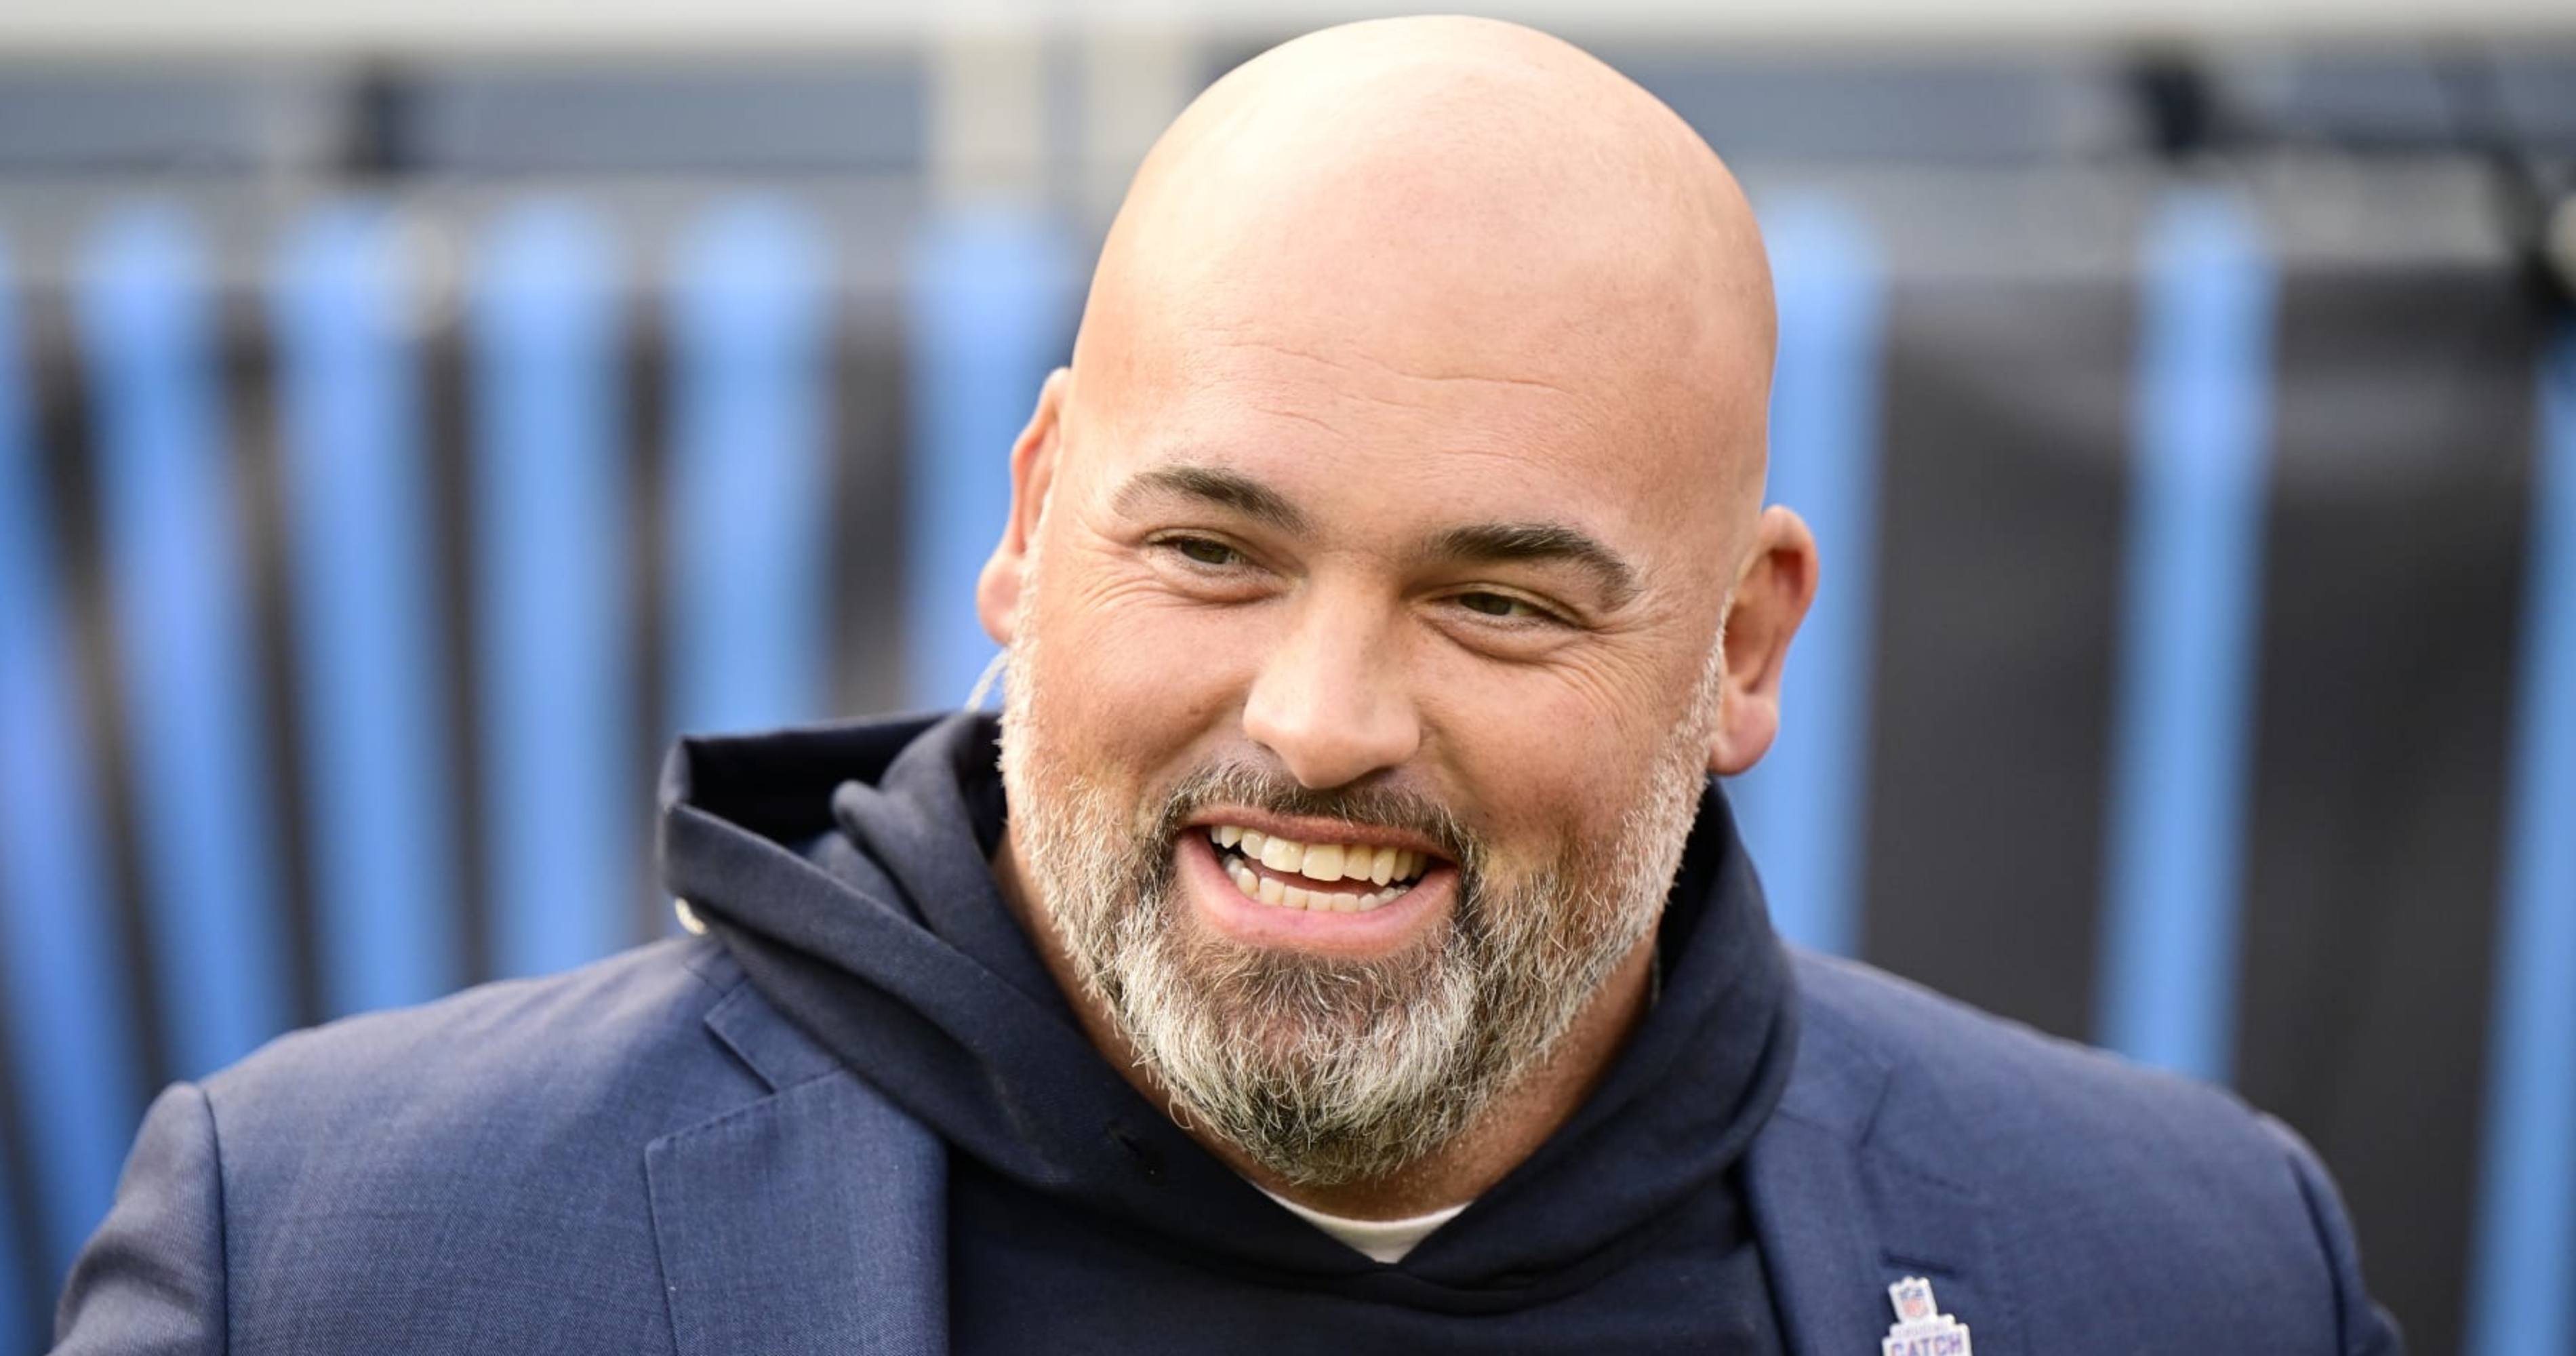 Andrew Whitworth on Ending Retirement to Join Bengals: 'I'll Never Say Never'